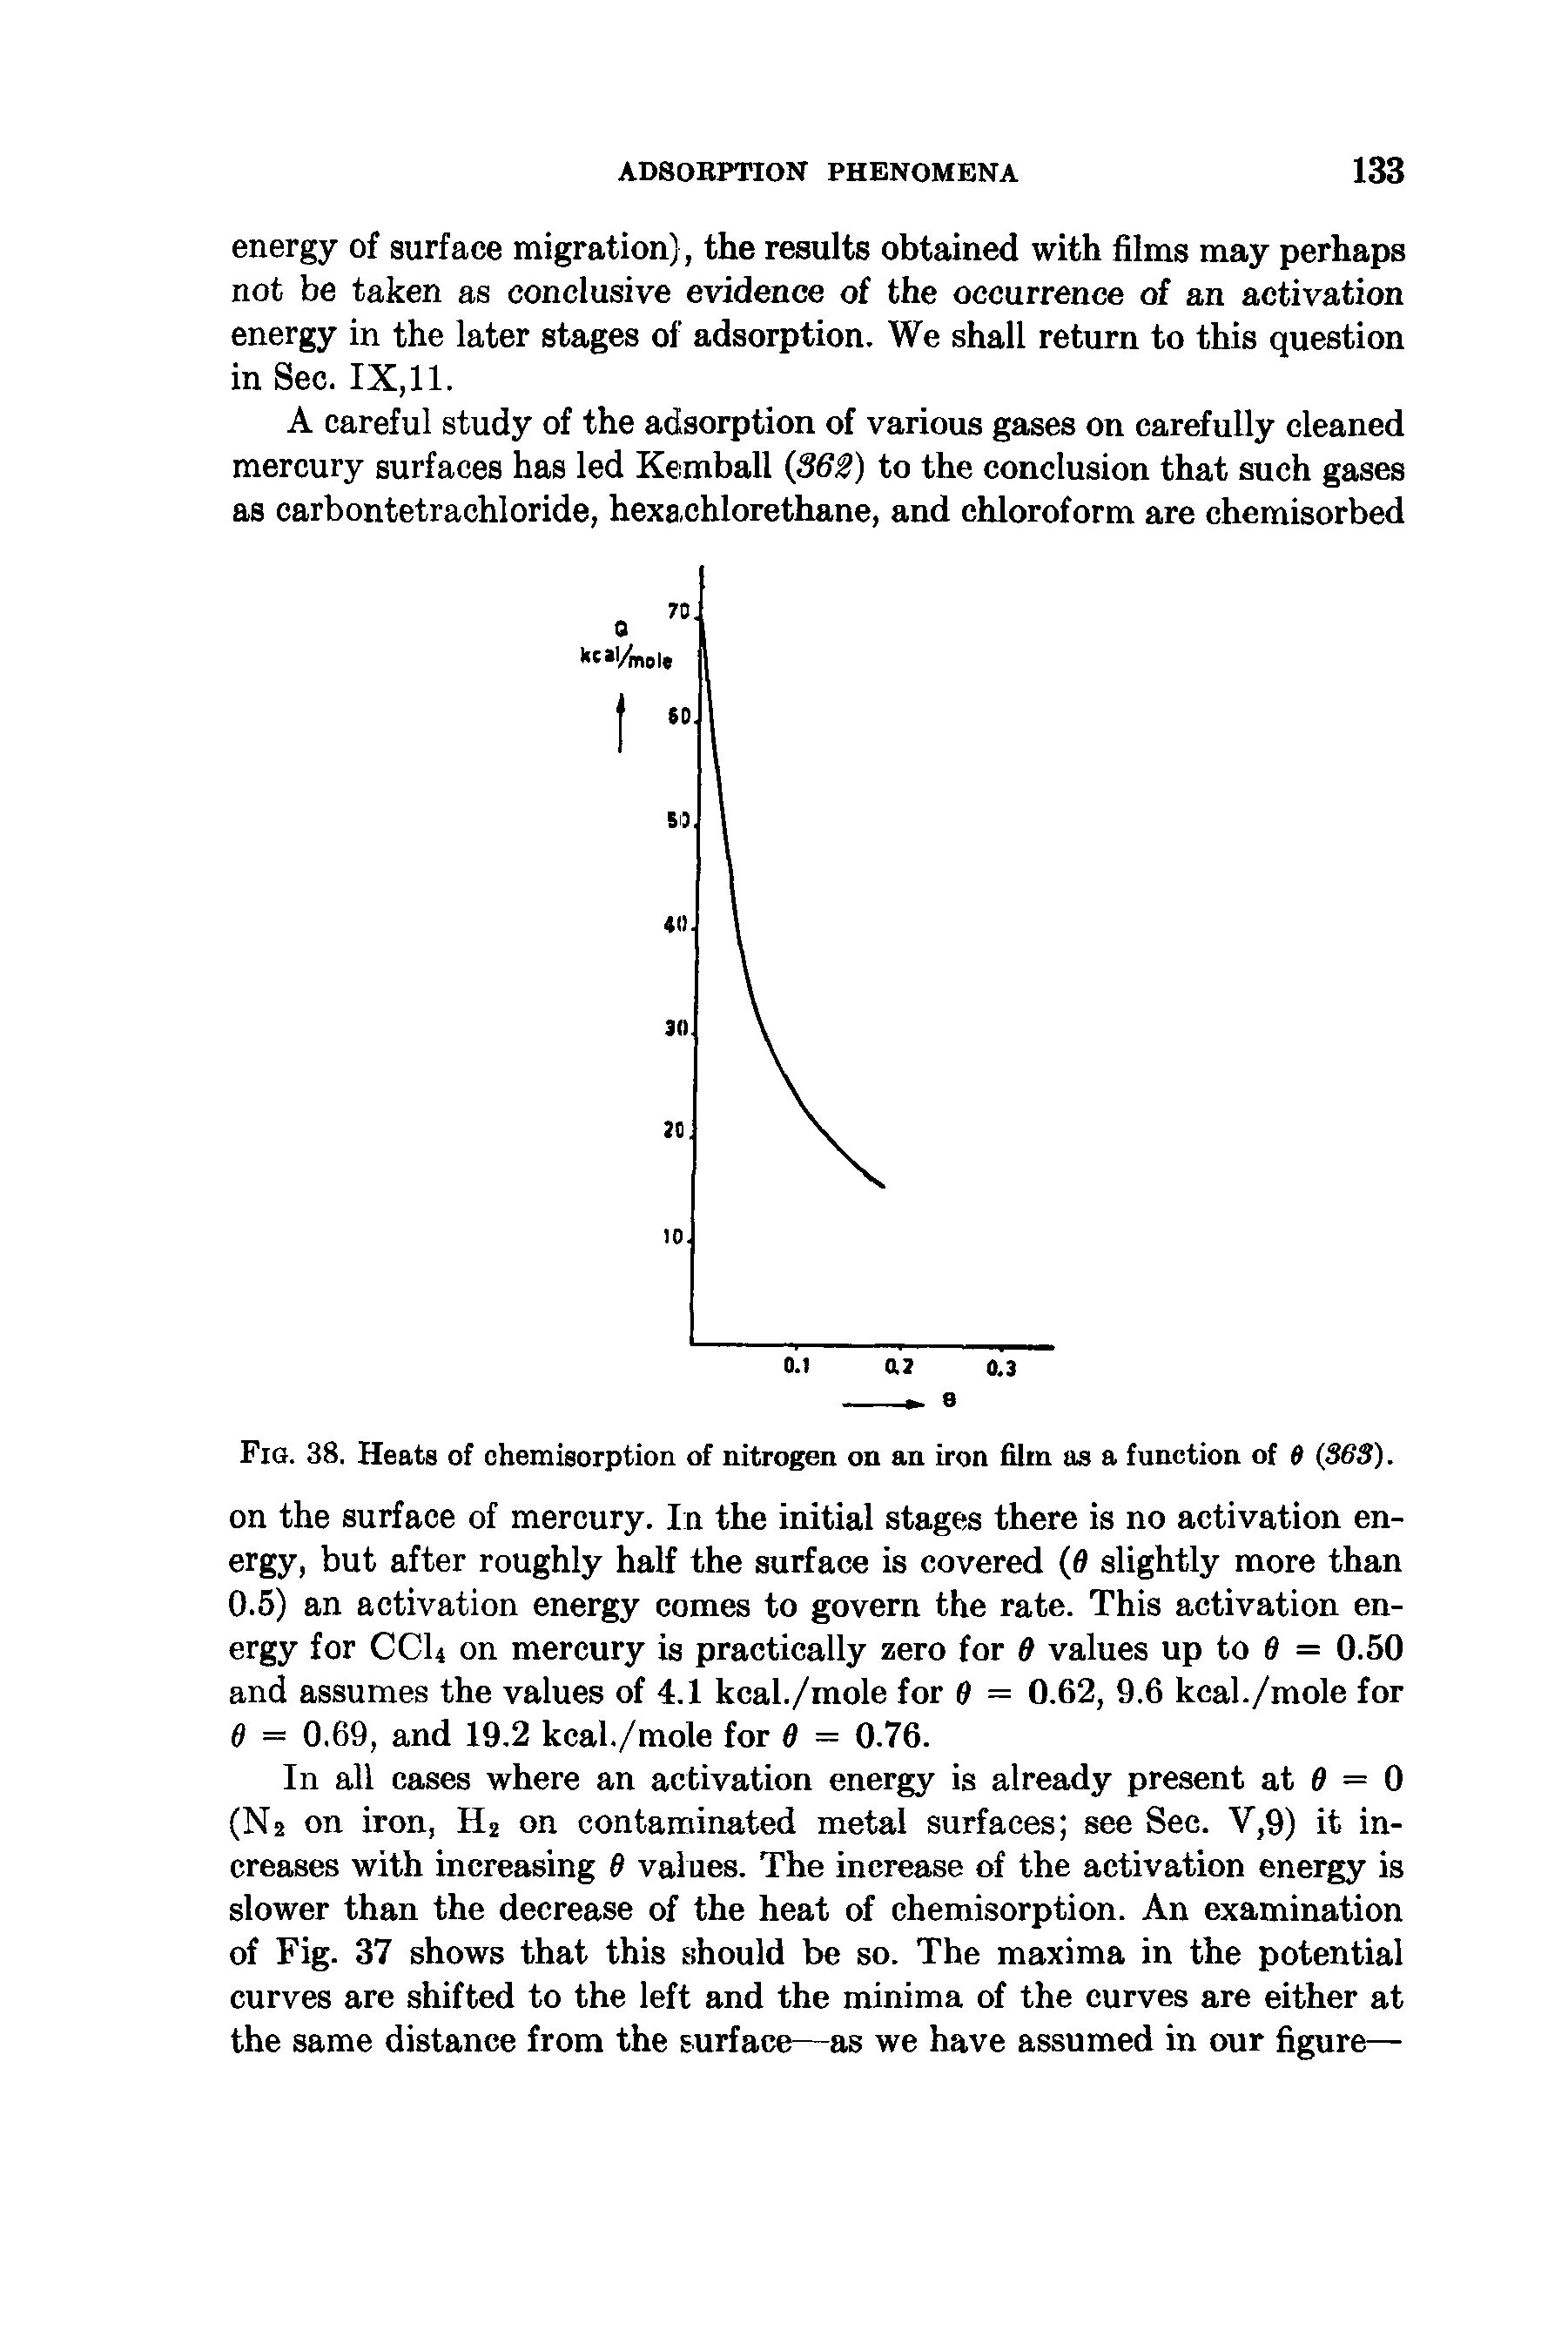 Fig. 38. Heats of chemisorption of nitrogen on an iron film as a function of 0 (S63).